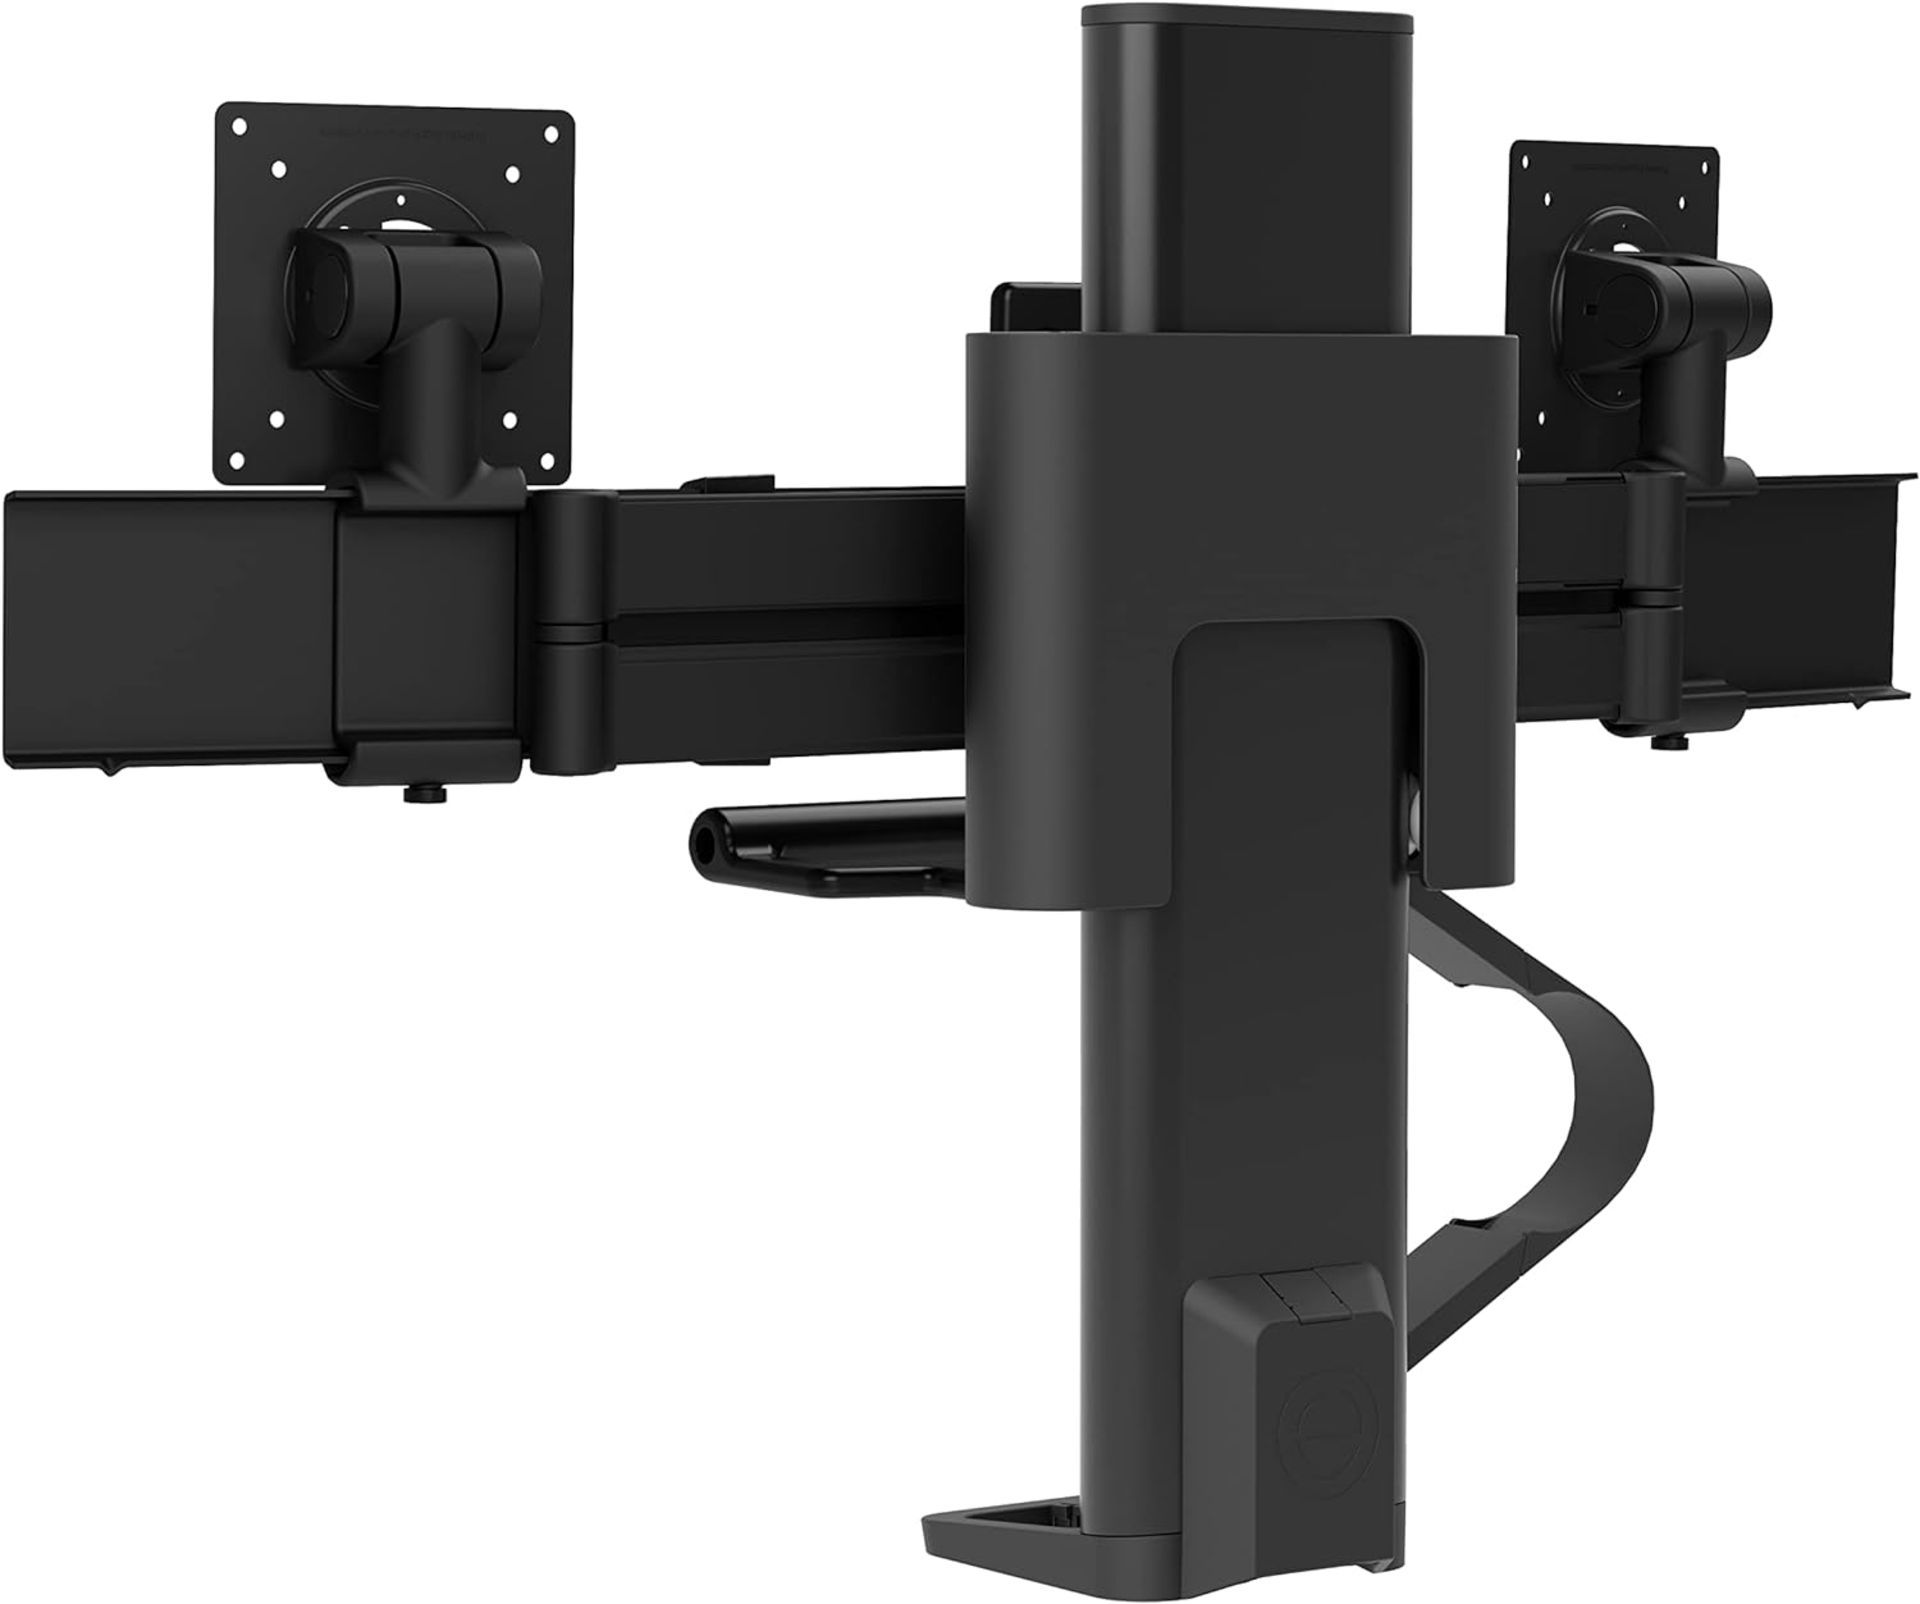 NEW & BOXED ERGOTRON Trace Dual Monitor Arm, VESA Desk Mount. RRP £417. (PCK5). for 2 Monitors Up to - Image 7 of 8